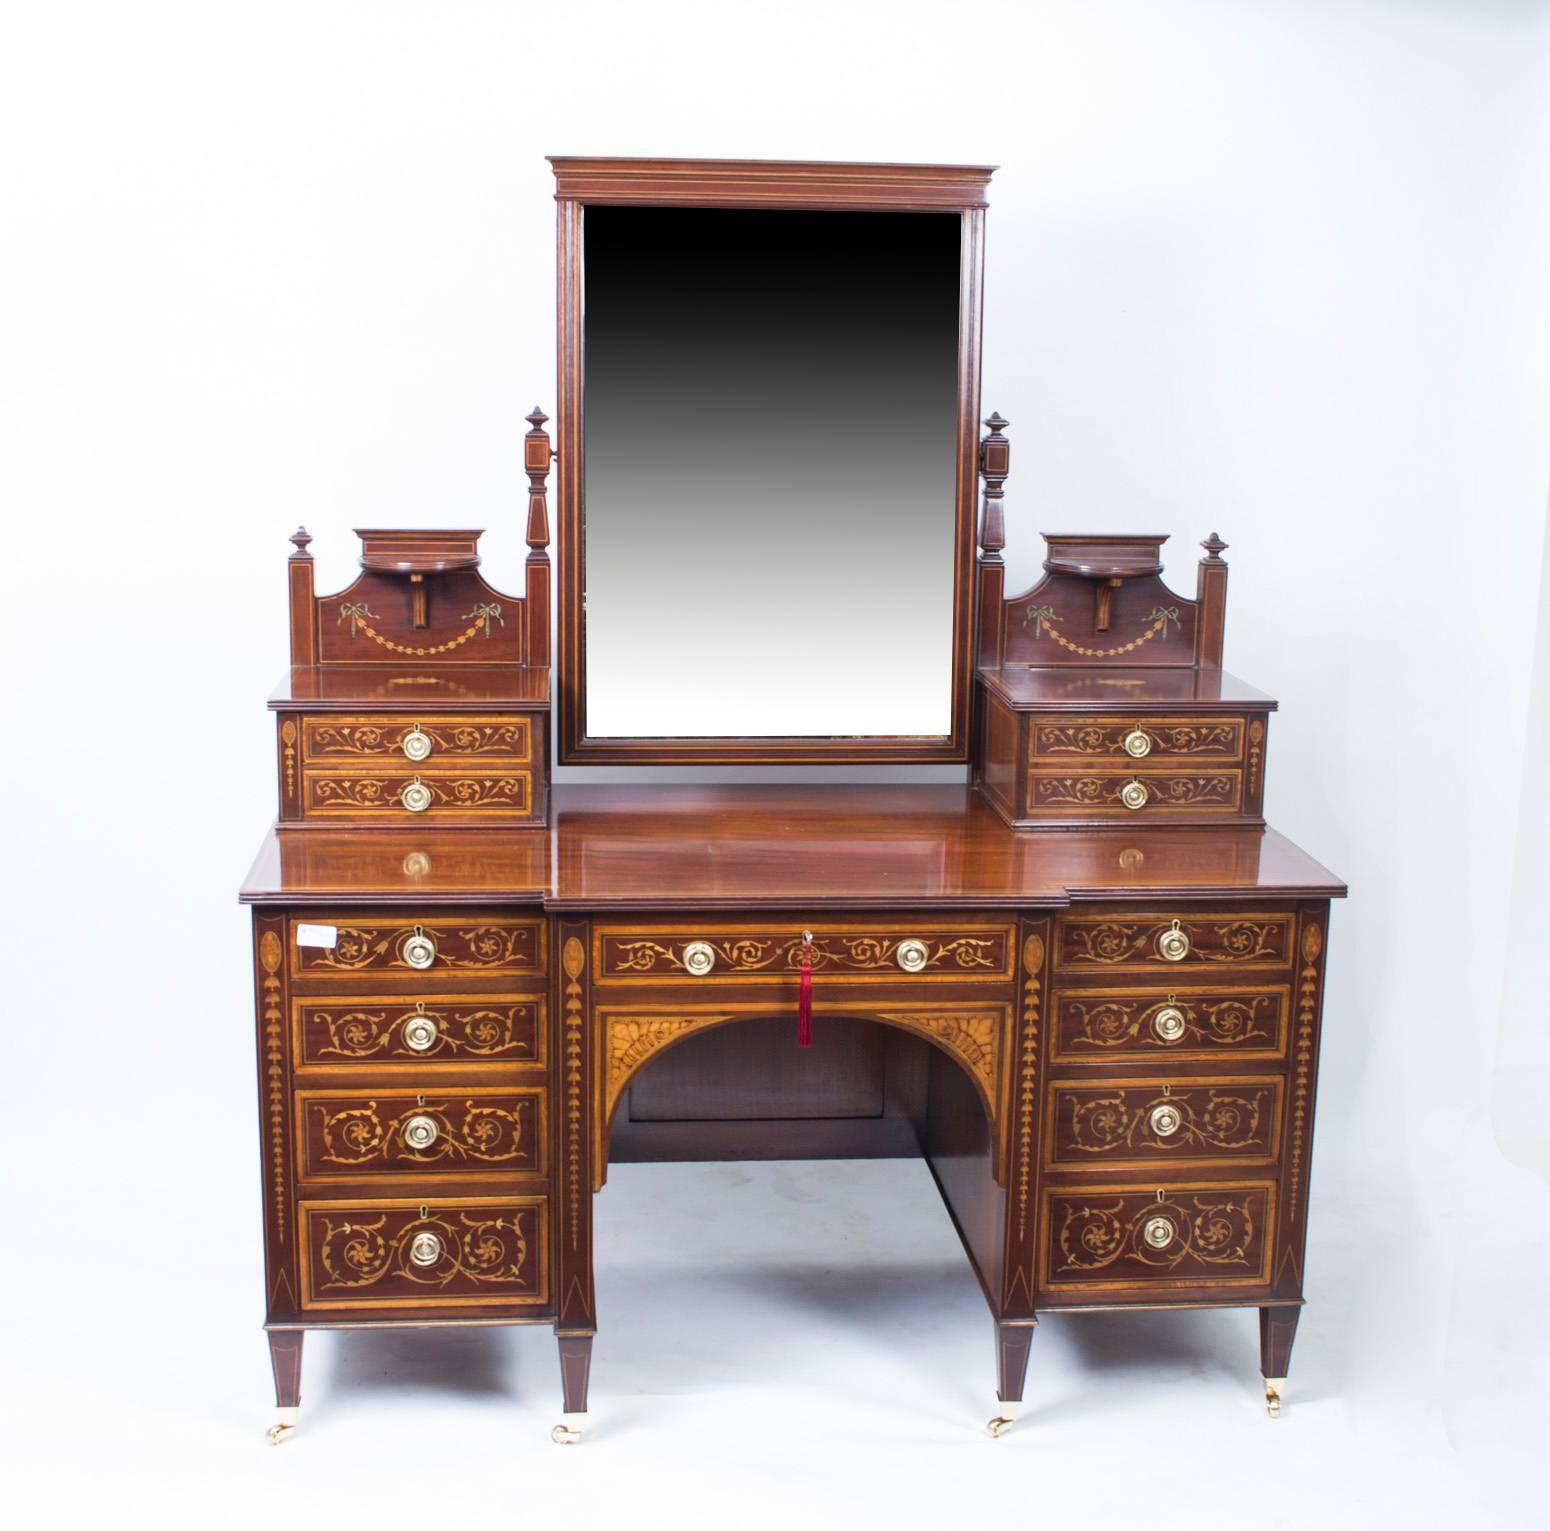 This is a spectacular antique late Victorian inlaid flame mahogany bedroom suite comprising a wardrobe and dressing table, bearing the enamel plaque of the renowned Victorian retailer and cabinet maker Maple & Co, circa 1880 in date.

The wardrobe